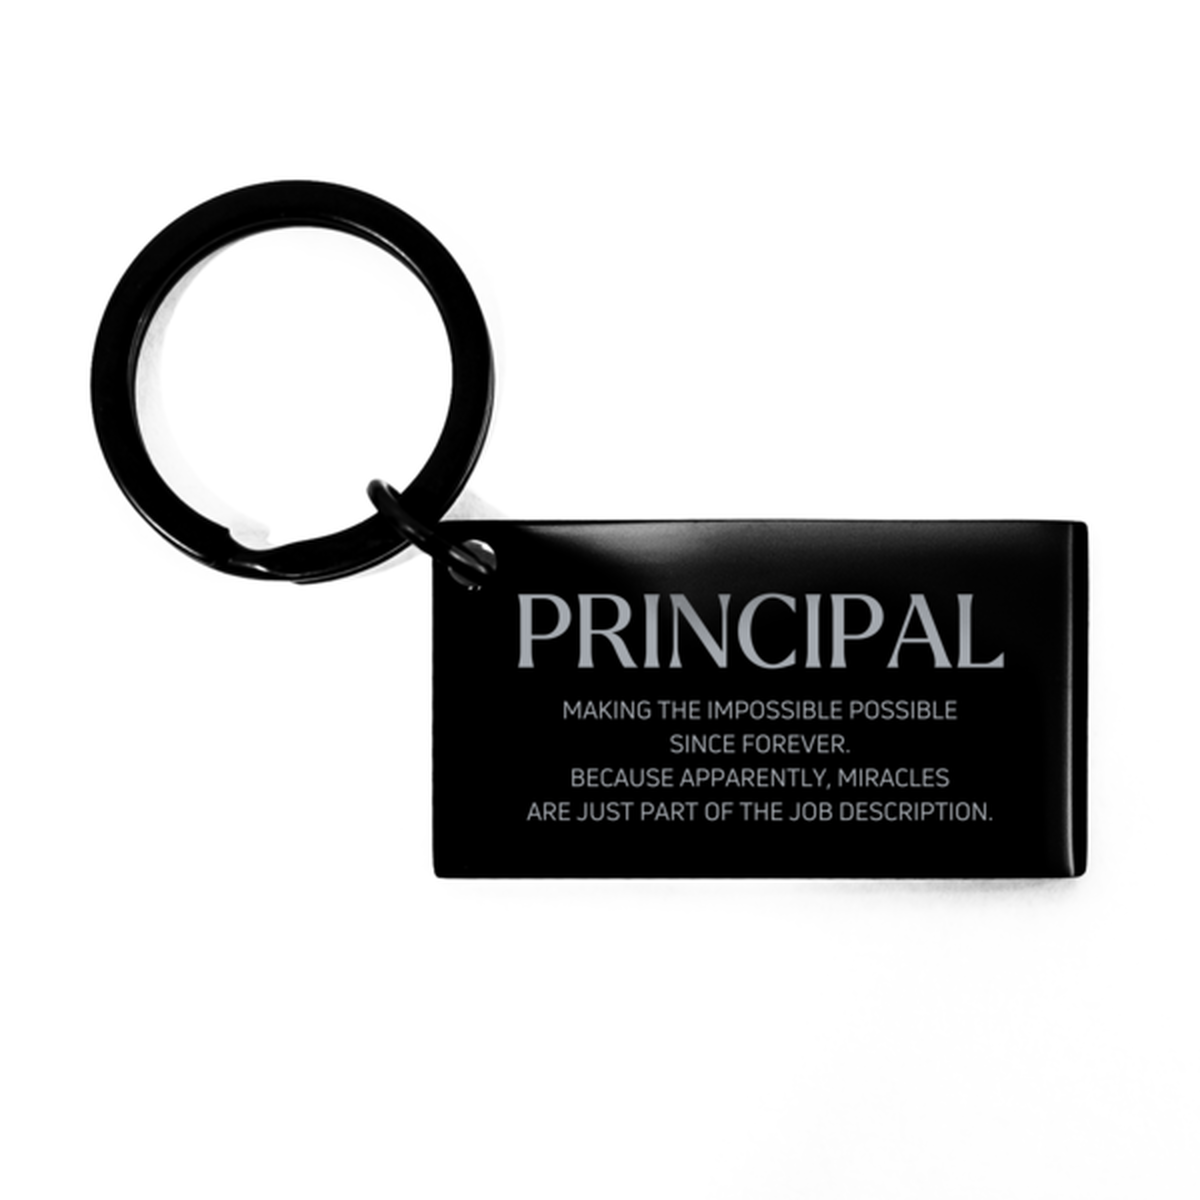 Funny Principal Gifts, Miracles are just part of the job description, Inspirational Birthday Keychain For Principal, Men, Women, Coworkers, Friends, Boss